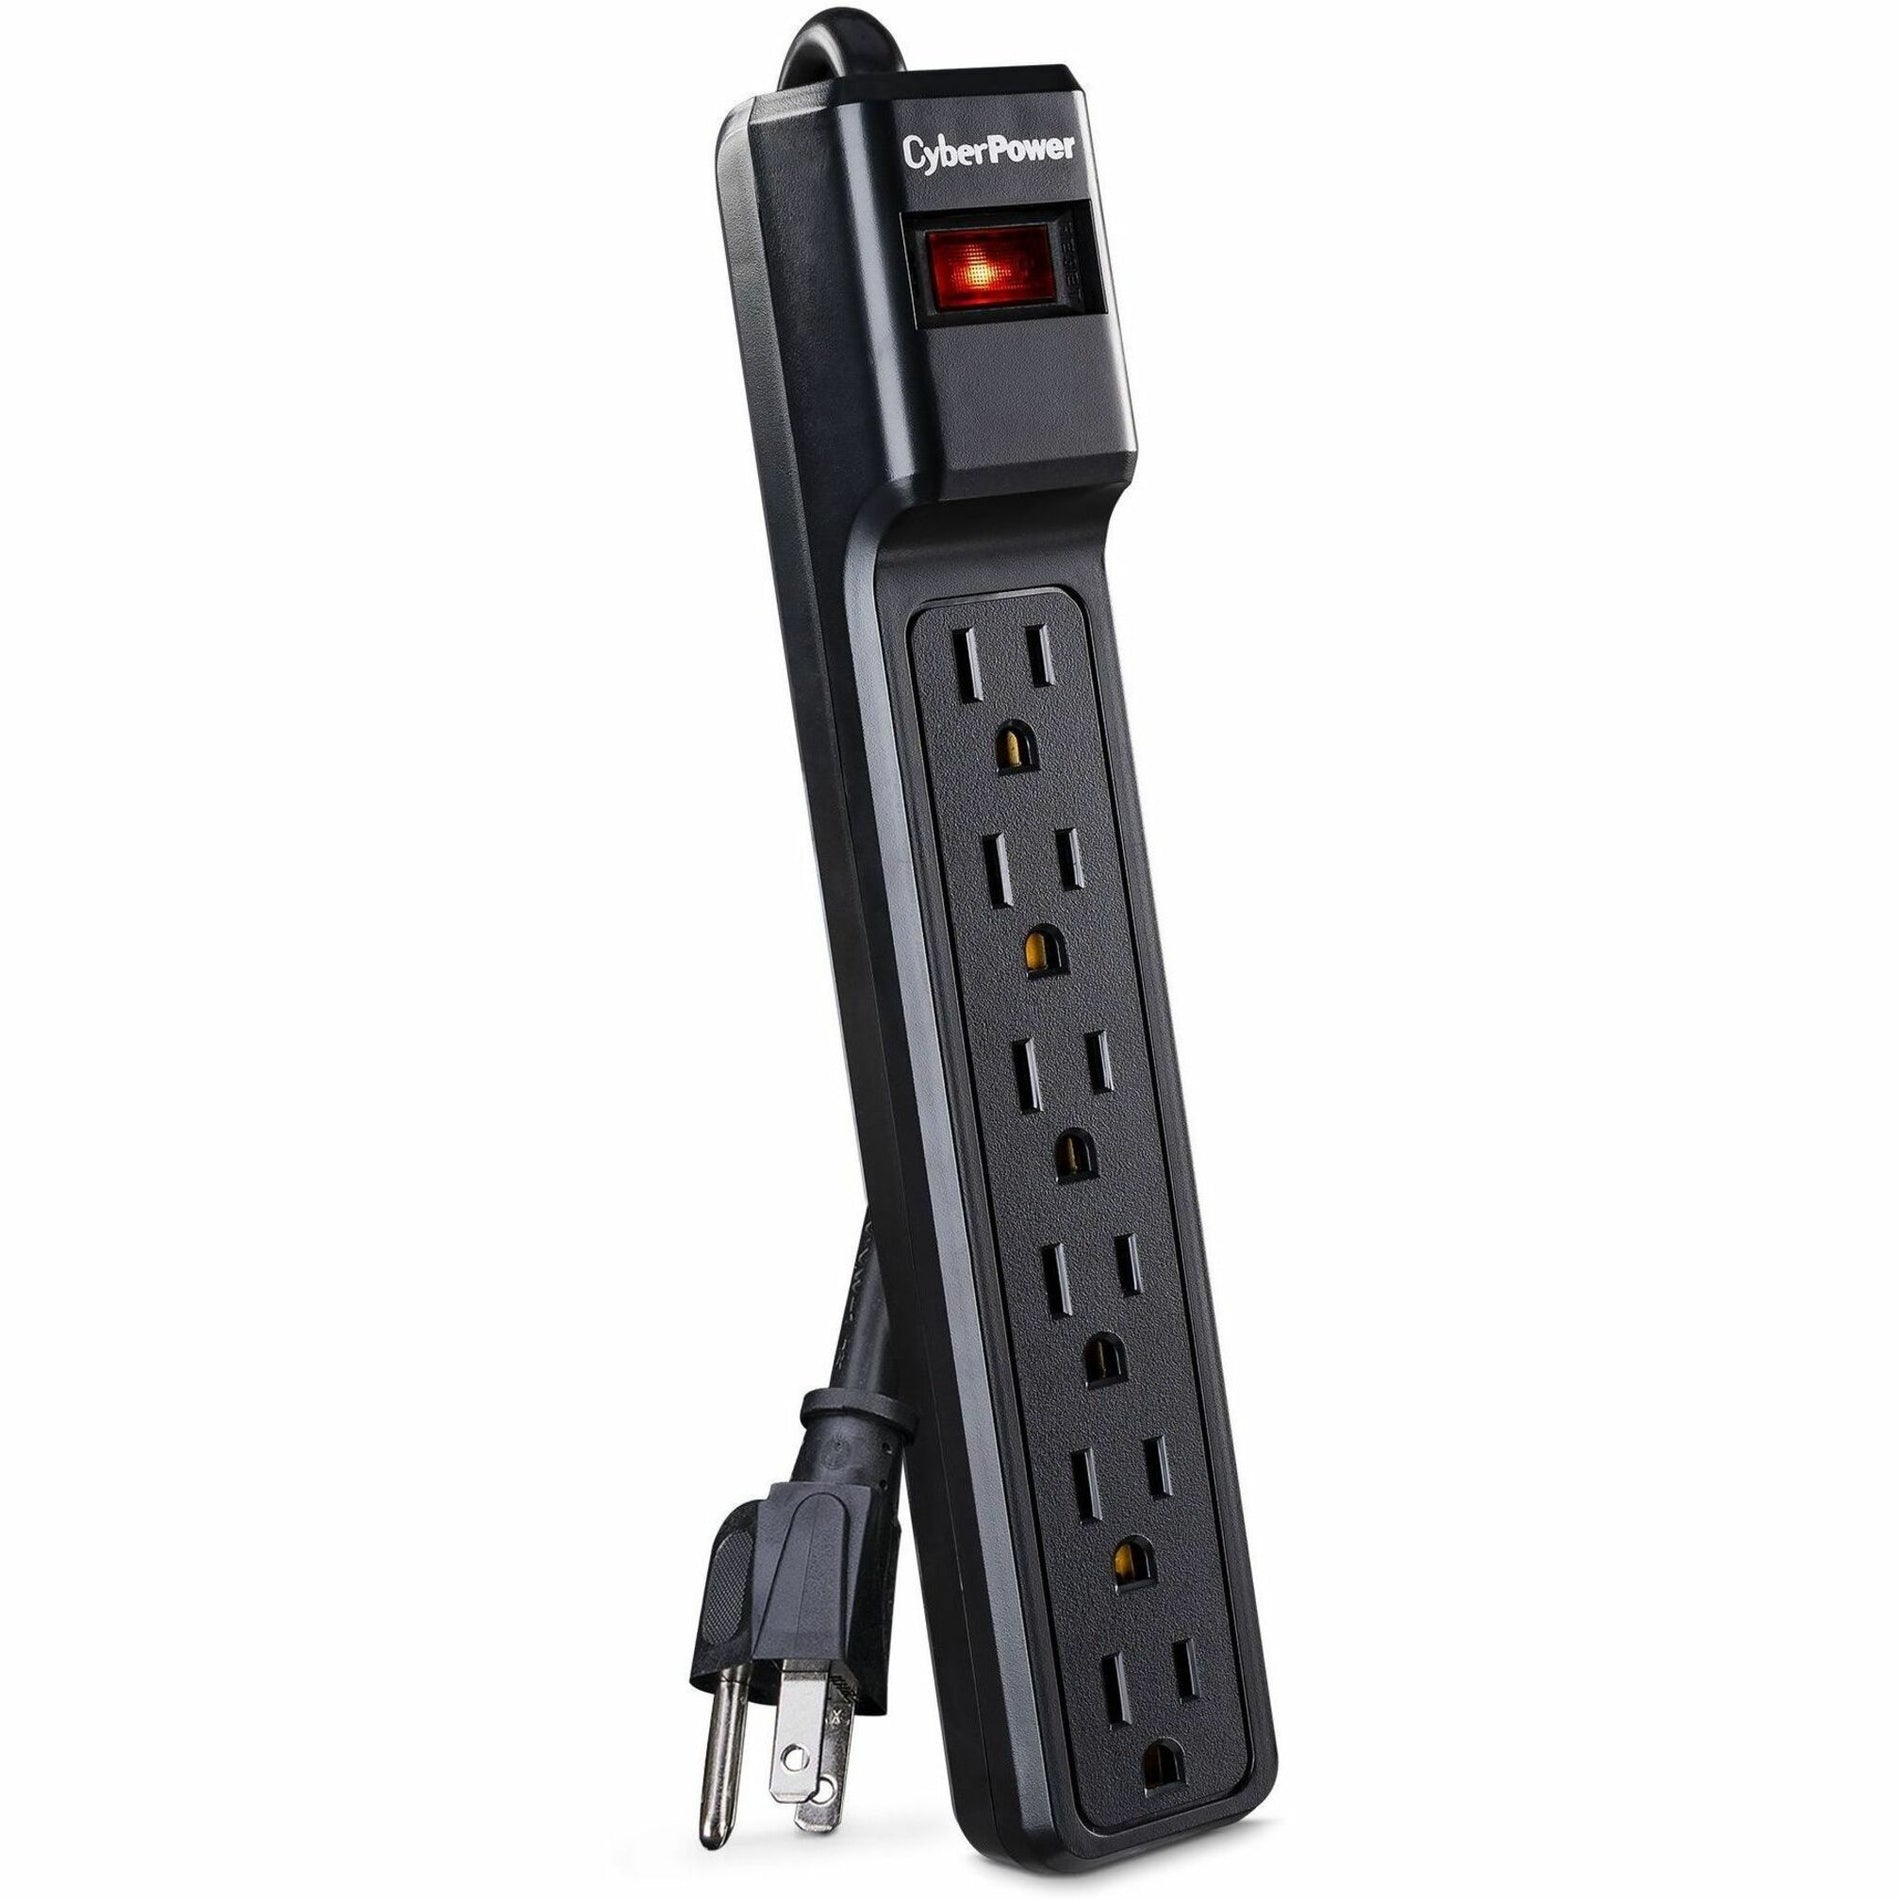 CyberPower CSB604 Essential 6-Outlets Surge Suppressor with 900 Joules and 4FT Cord, Protect Your Electronics with Lifetime Warranty